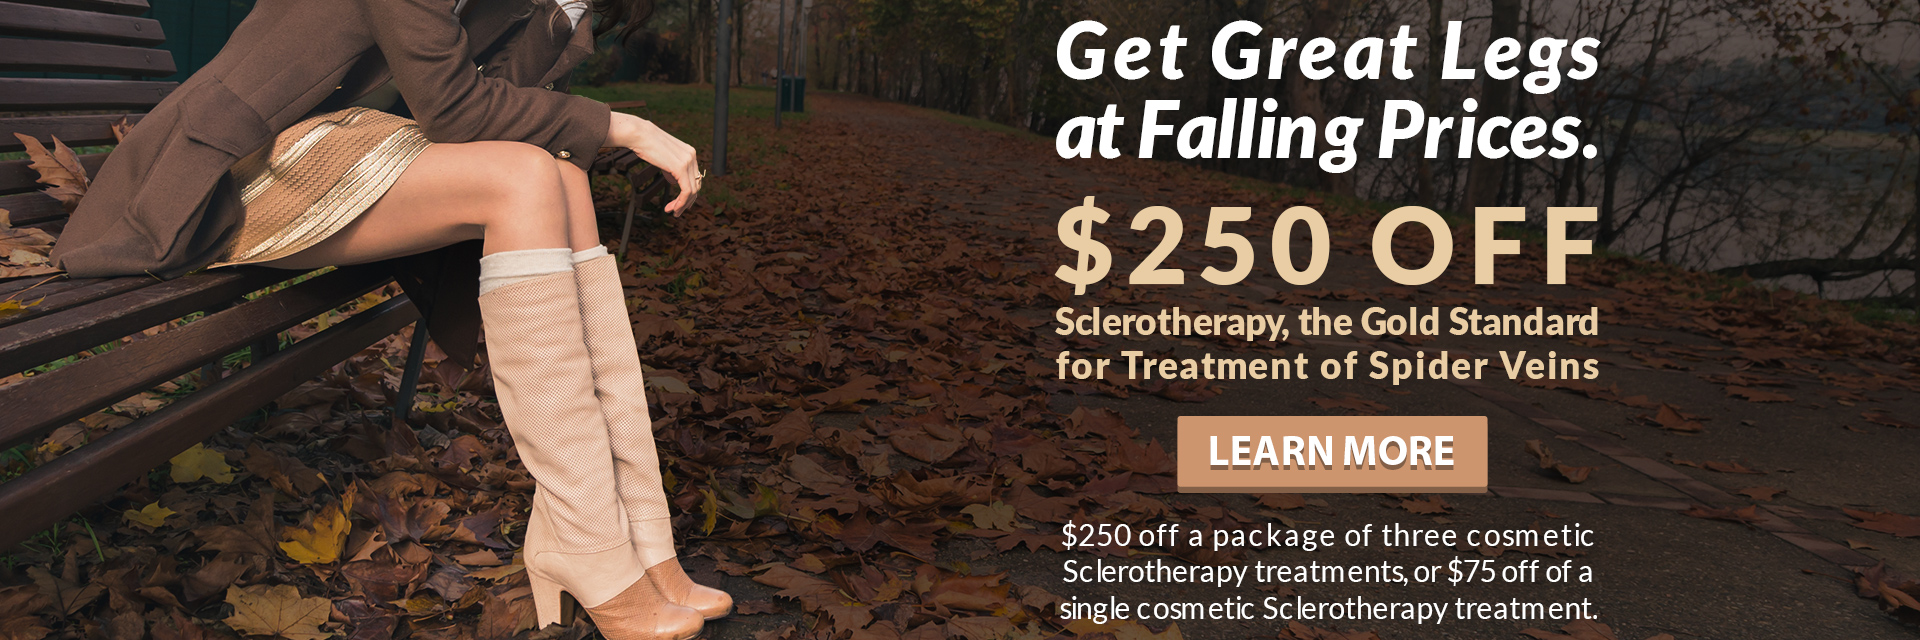 $250 OFF Sclerotherapy, the gold standard for treatment of spider veins.